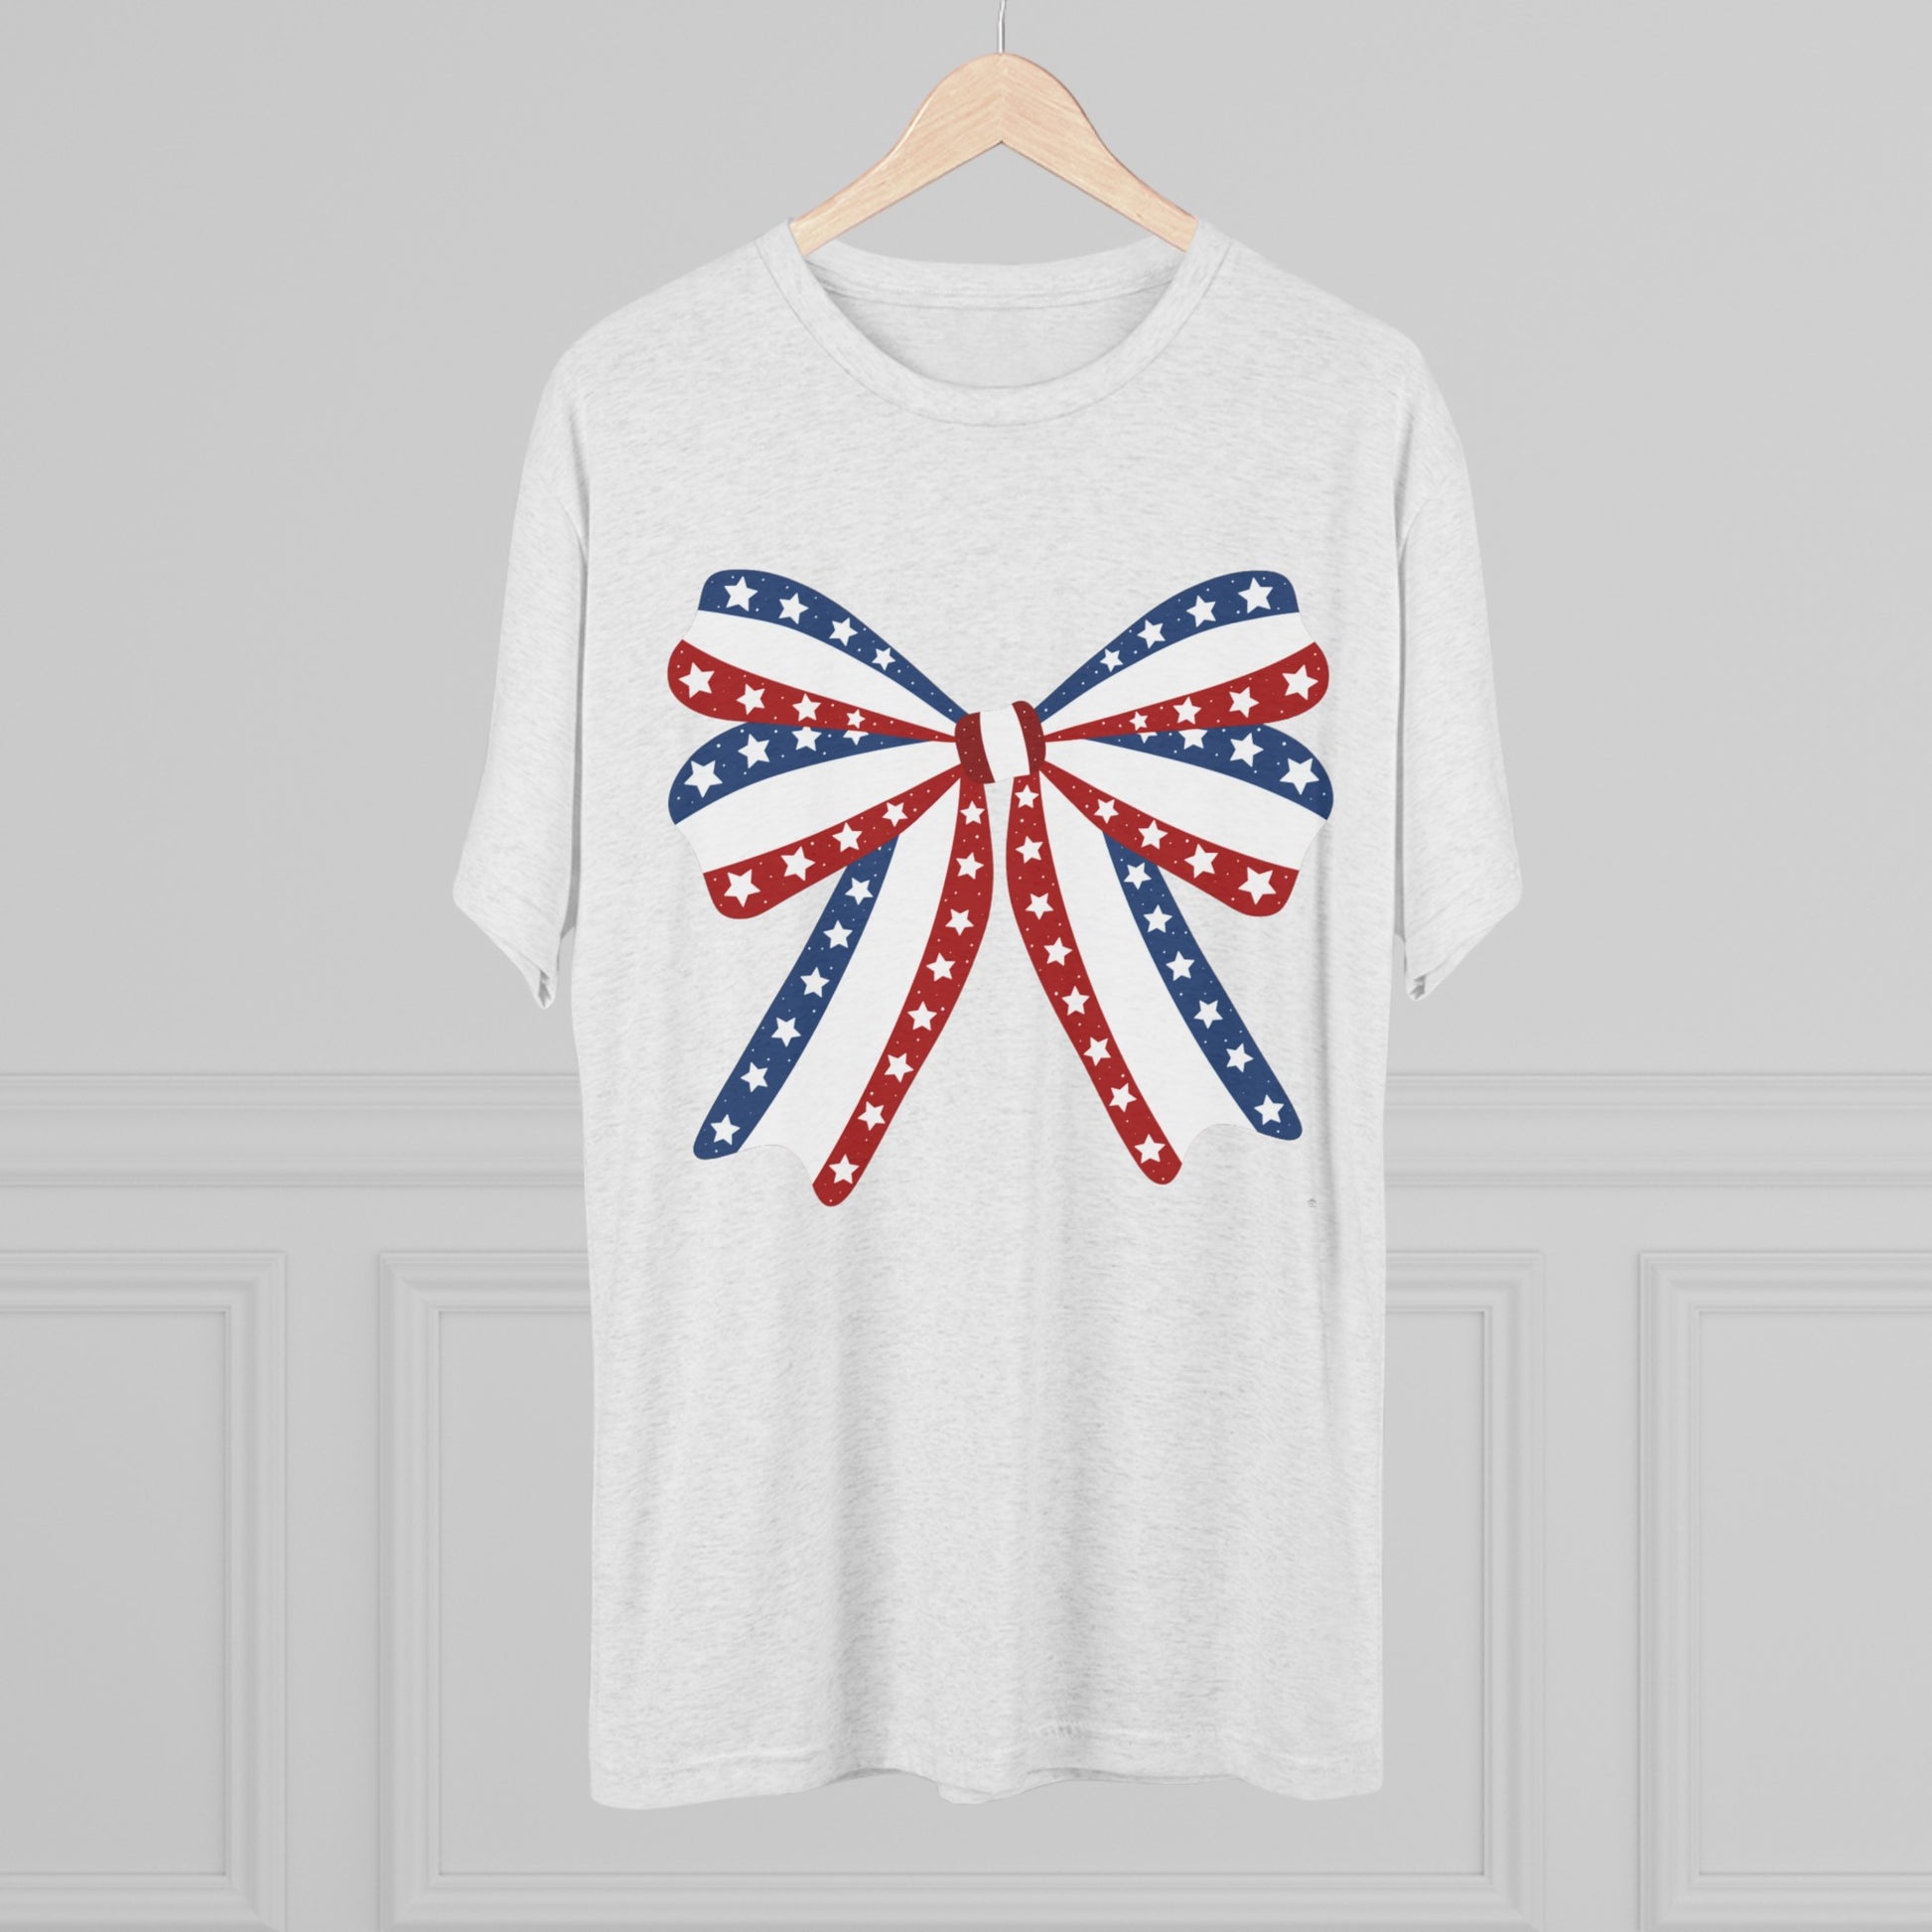 Get trendy with Patriotic Bow Tri-Blend Crew Tee - T-Shirt available at Good Gift Company. Grab yours for $18.96 today!